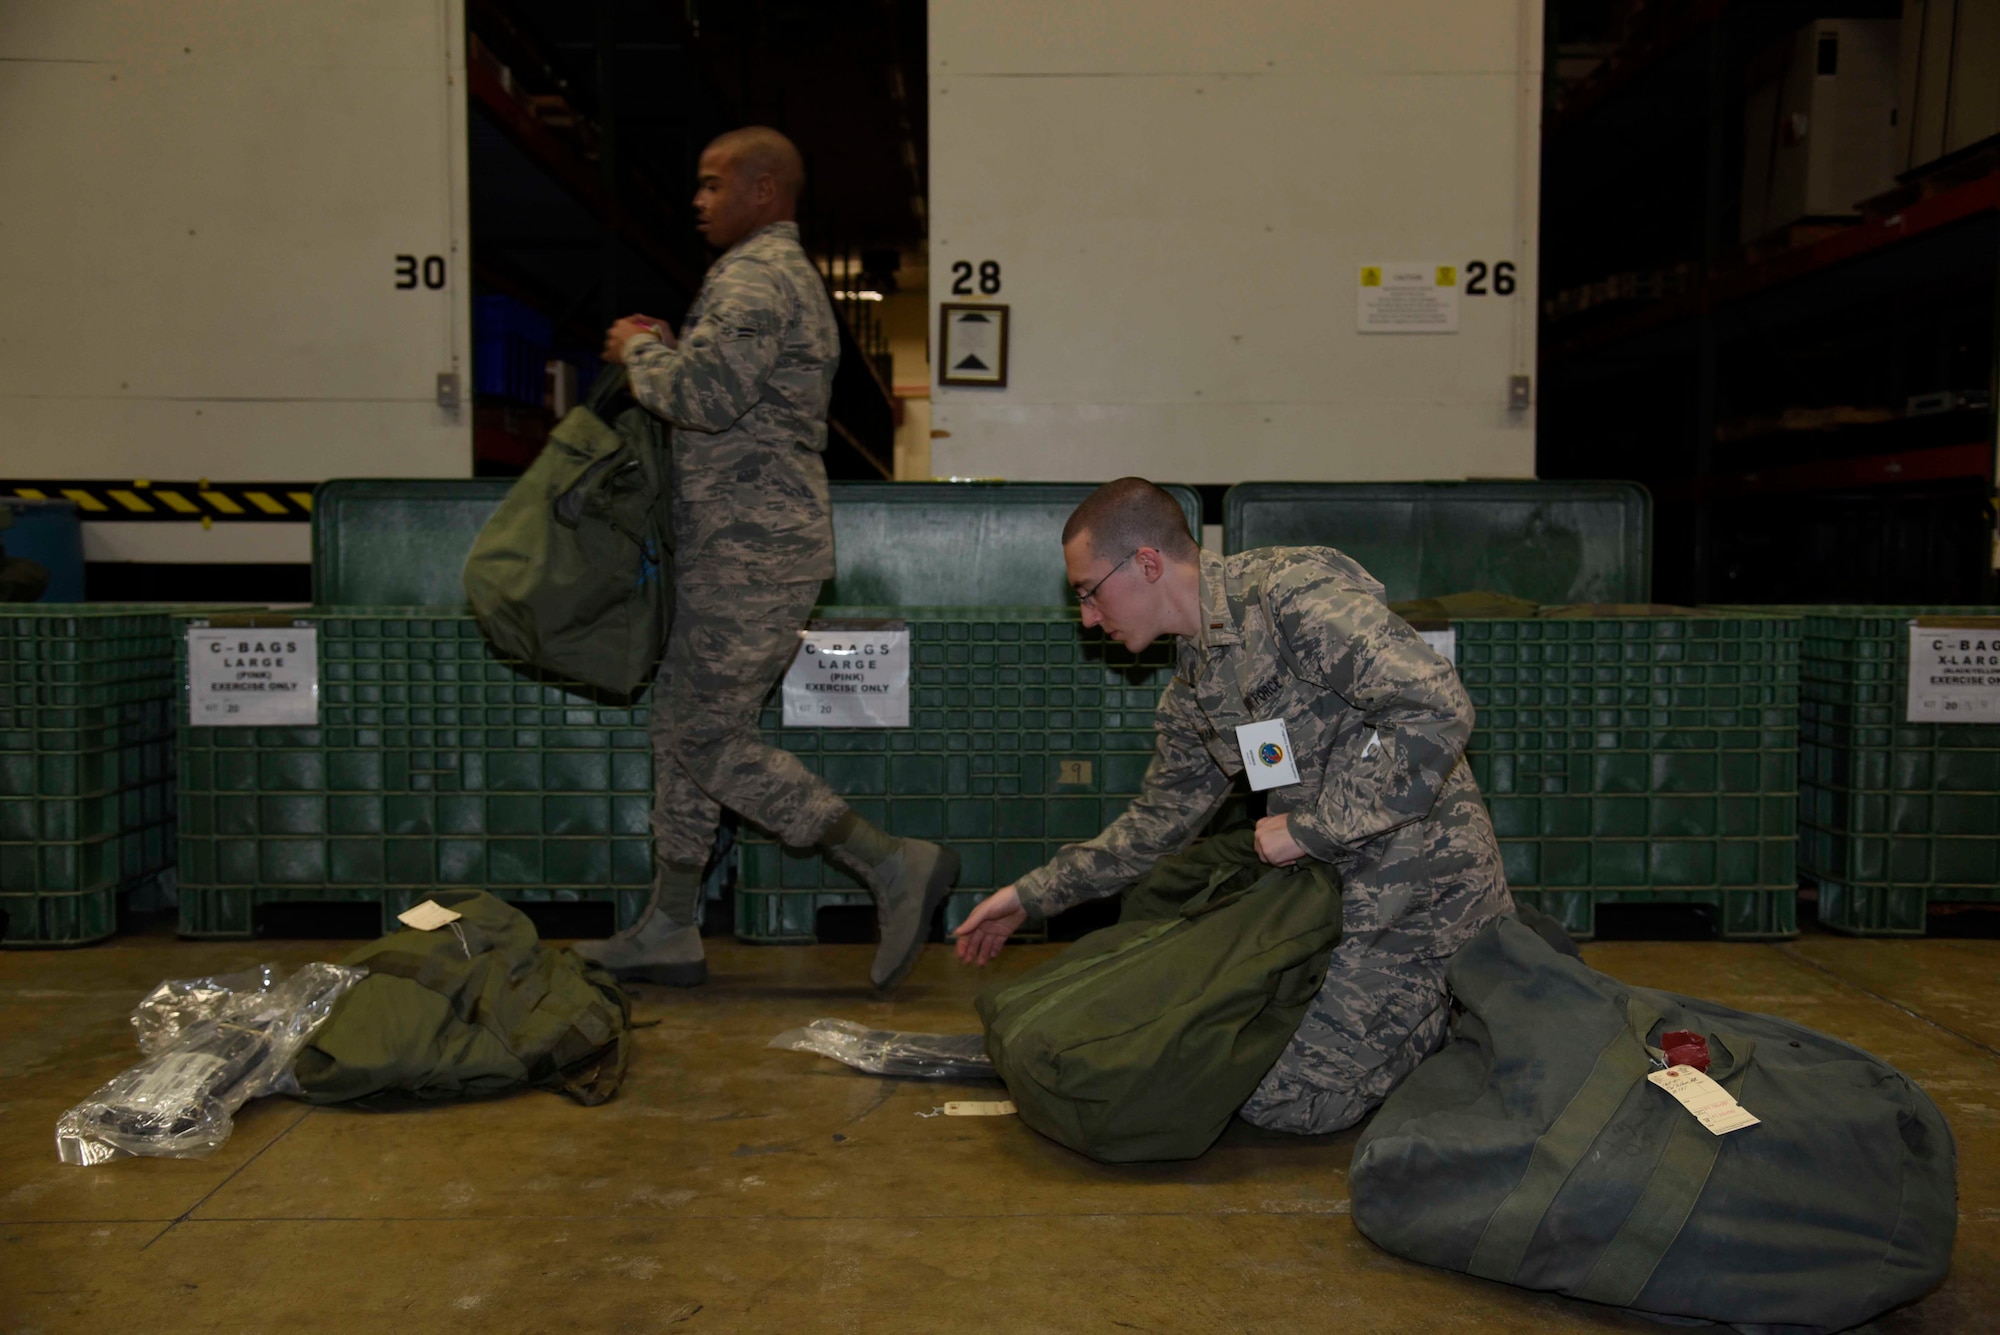 Airmen with the 35th Logistics Readiness Squadron assemble mission oriented protective posture equipment bags during exercise Beverly Sunrise 16-01 at Misawa Air Base, Japan, Nov. 1, 2015. The gear consists of body armor, overboots, protective masks and gloves used to protect personnel from chemical, biological, radiological and nuclear threats. (U.S. Air Force photo by Airman 1st Class Jordyn Fetter/Released)